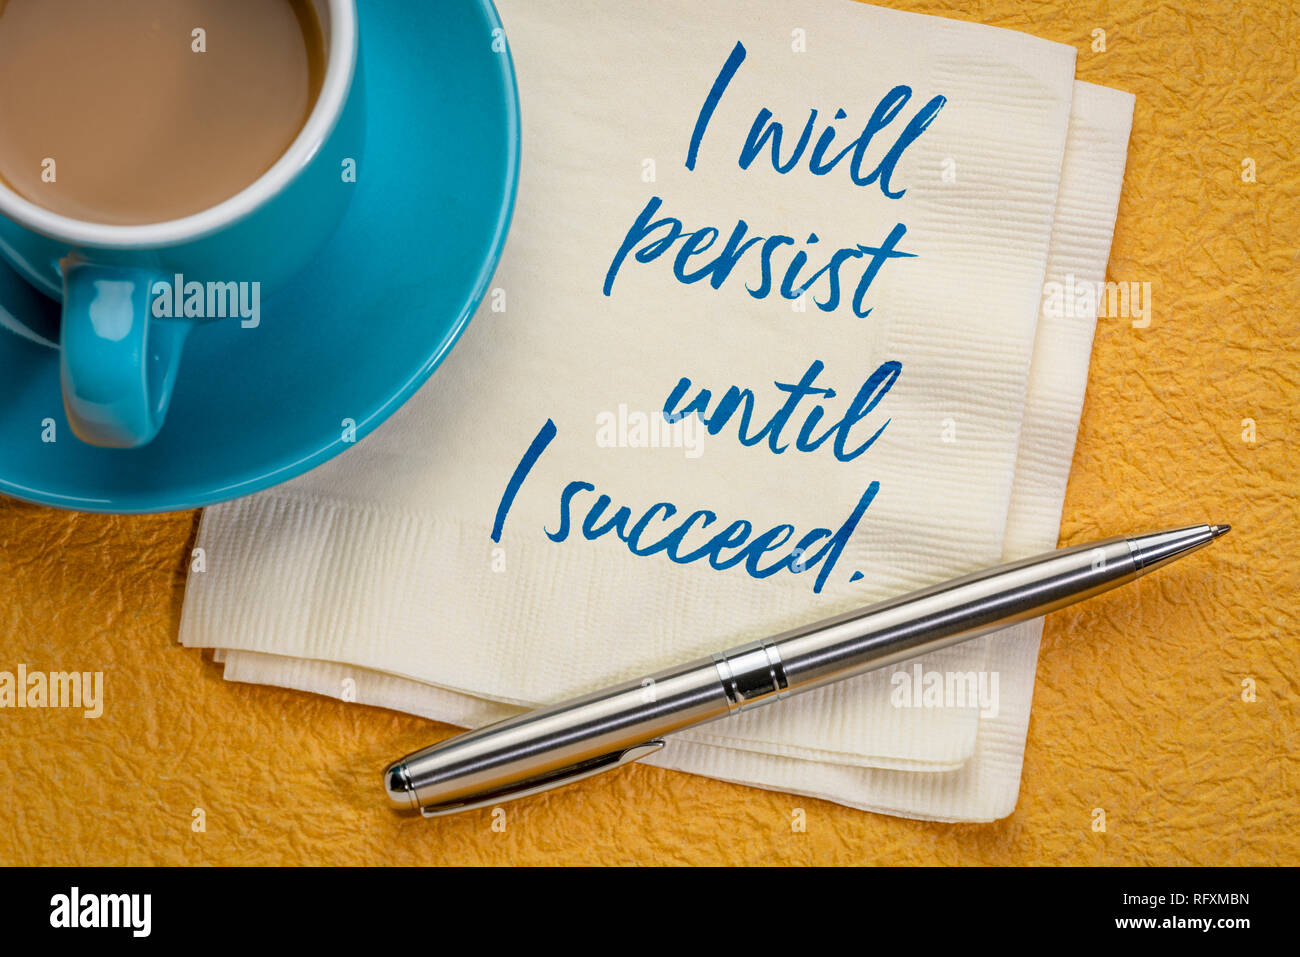 I will persist until I succeed - handwriting on a napkin with a cup of coffee Stock Photo